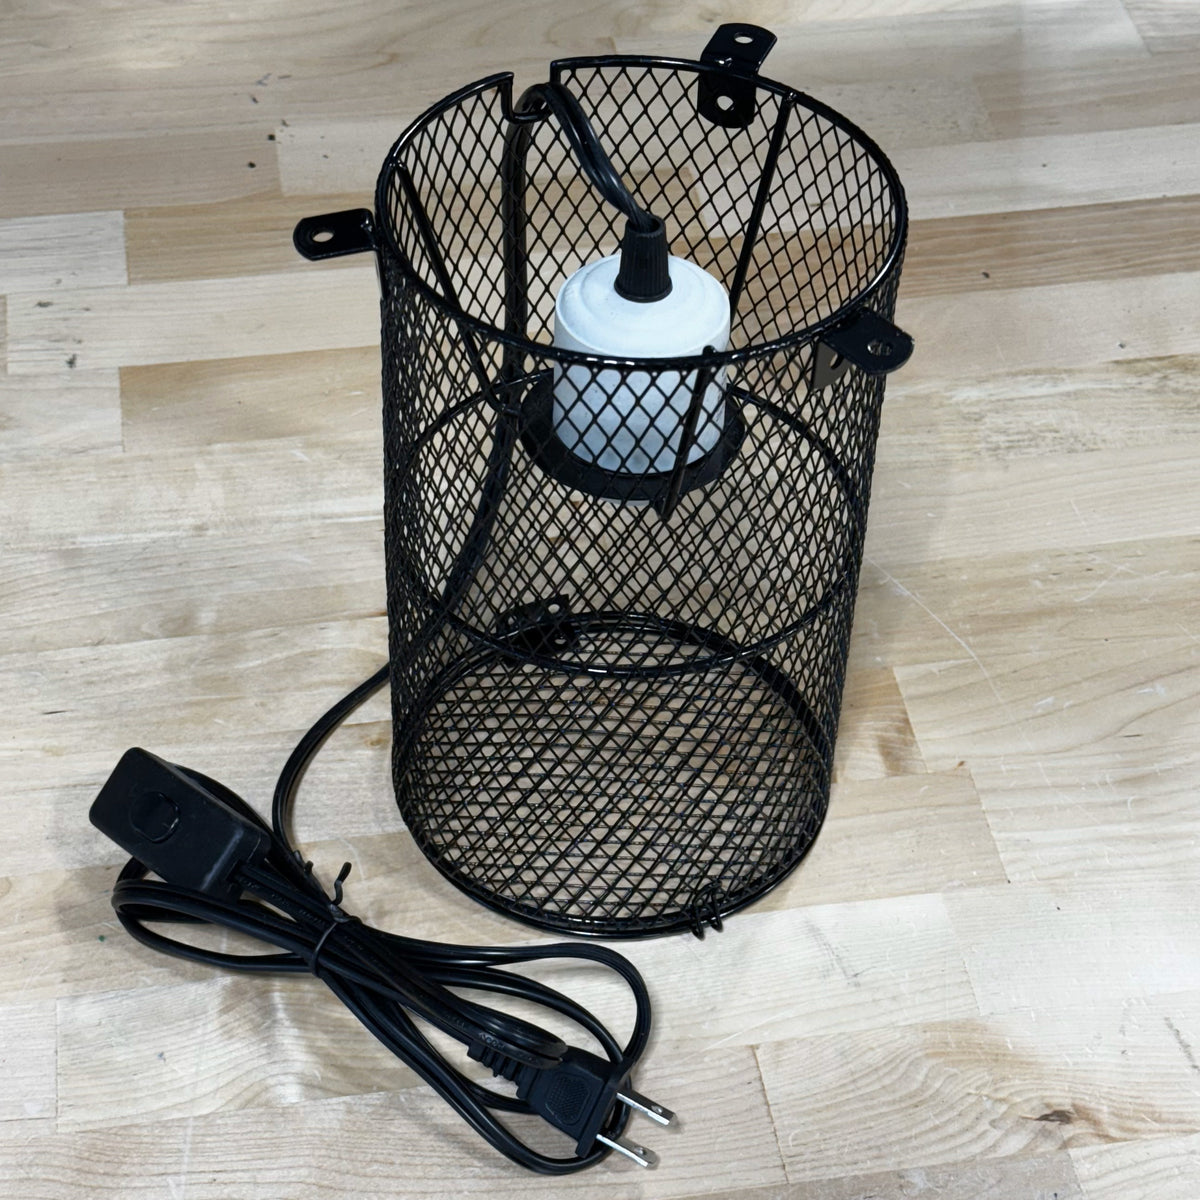 Reptile Heat Lamp Fixture with Integrated Safety Basket | Medium